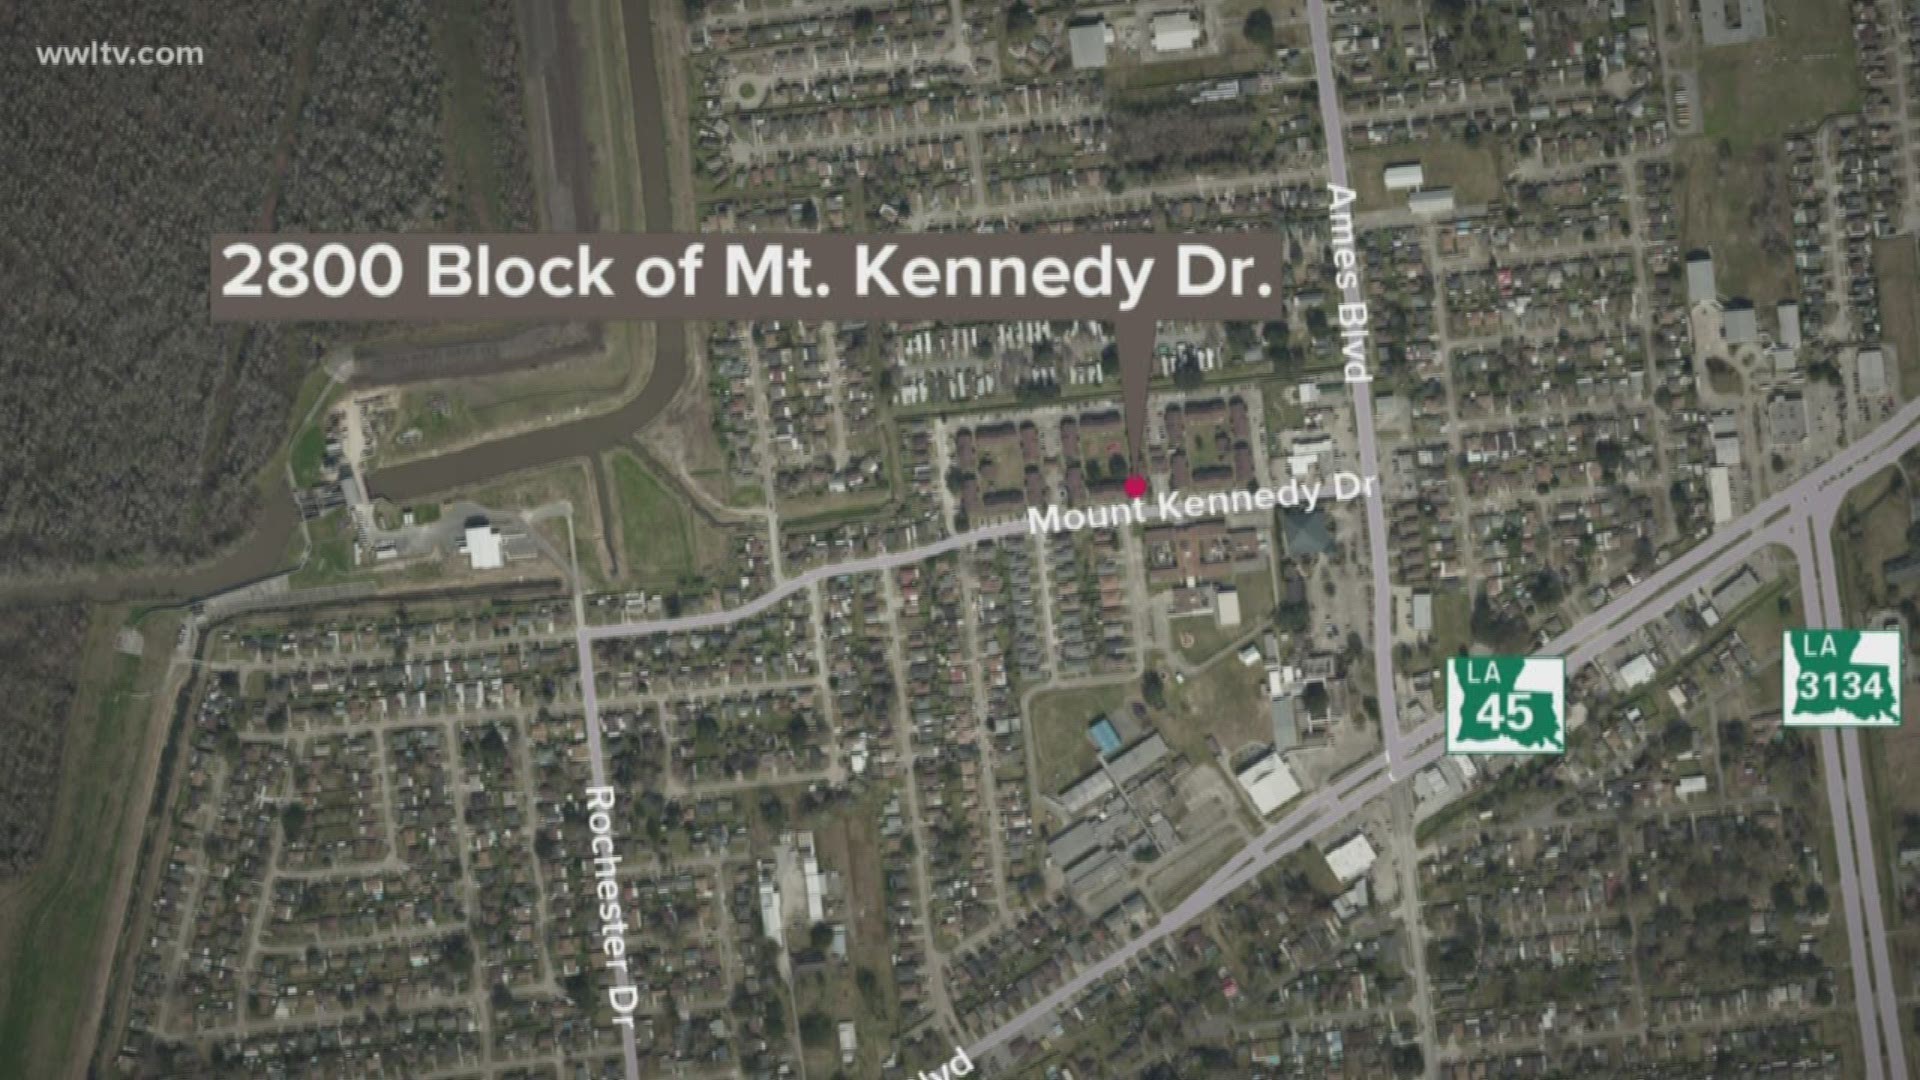 The Jefferson Parish Sheriff's Office first reported the killing around 4:30 p.m.